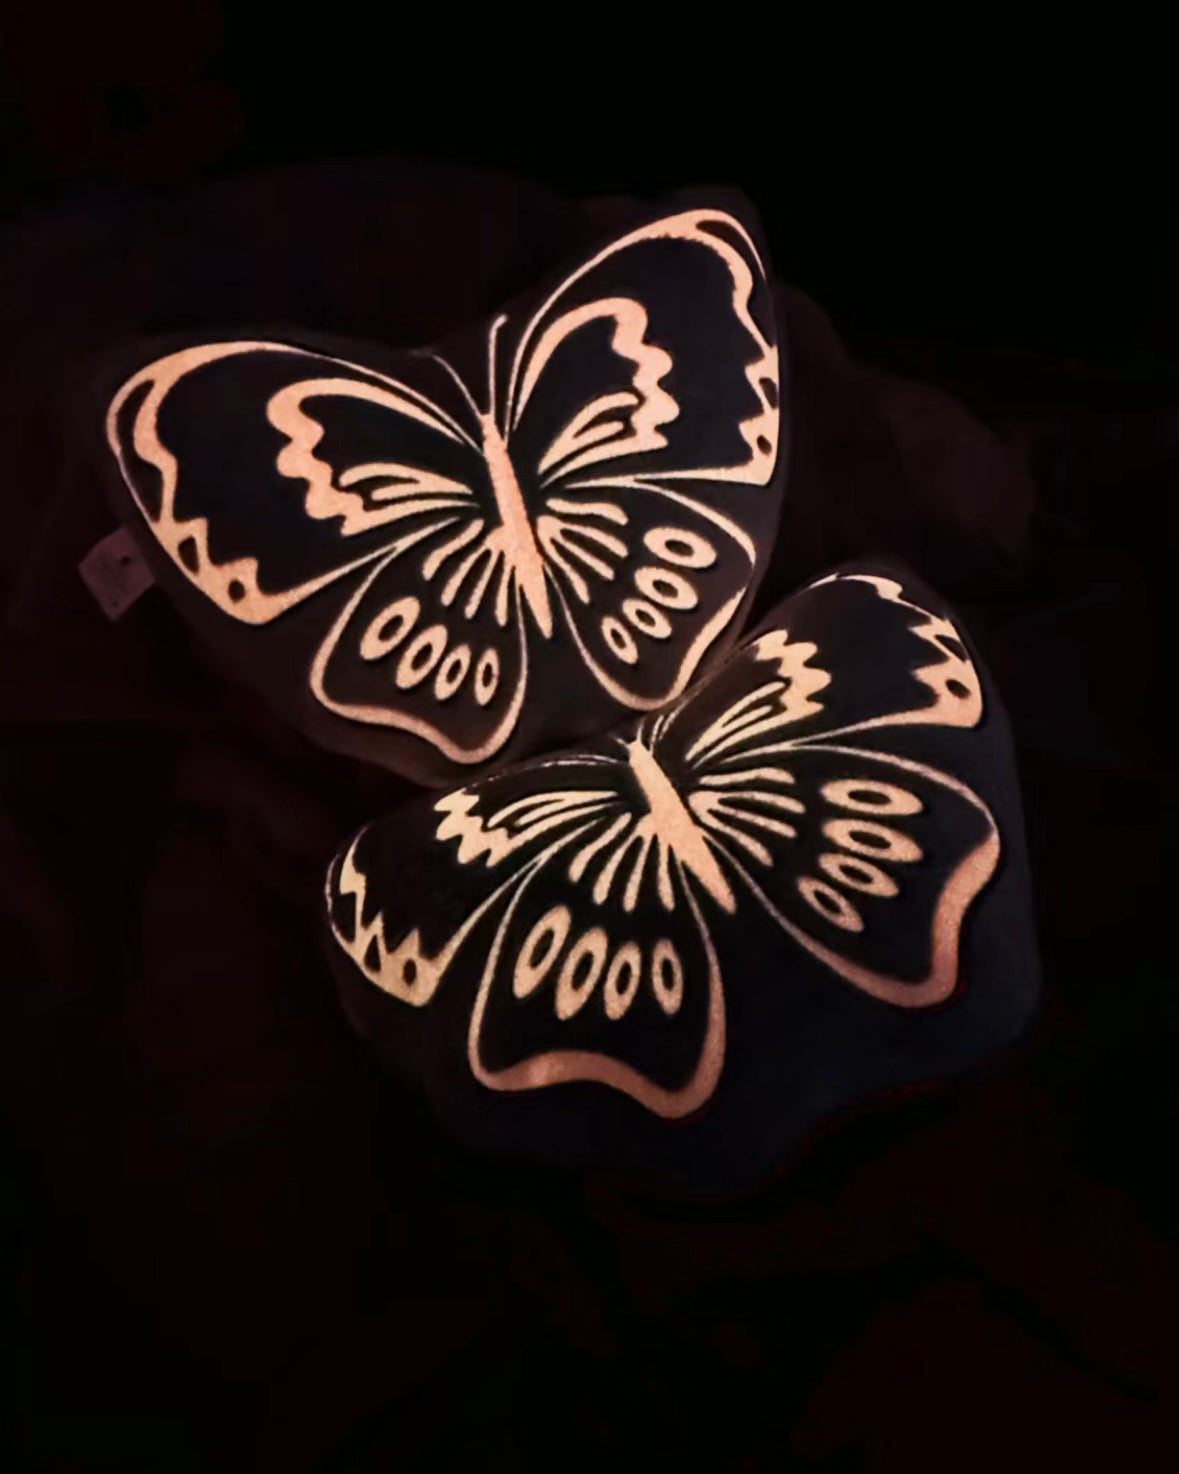 Glowing Butterfly Shaped Pillow - Luminescent Bedroom Decor, Soft Glow Cushion, Glow-in-the-Dark Decorative Accent